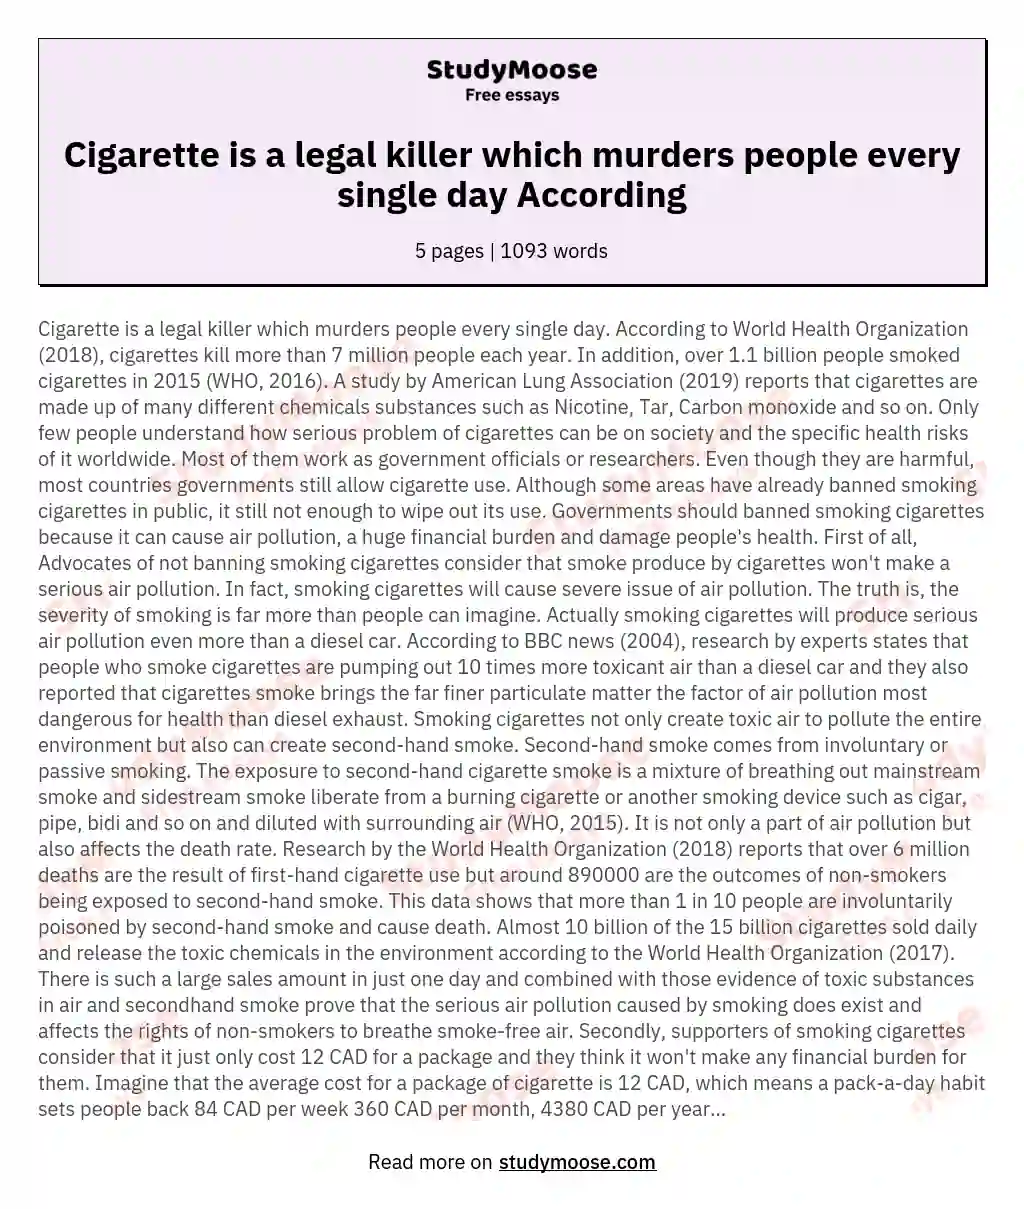 Cigarette is a legal killer which murders people every single day According essay